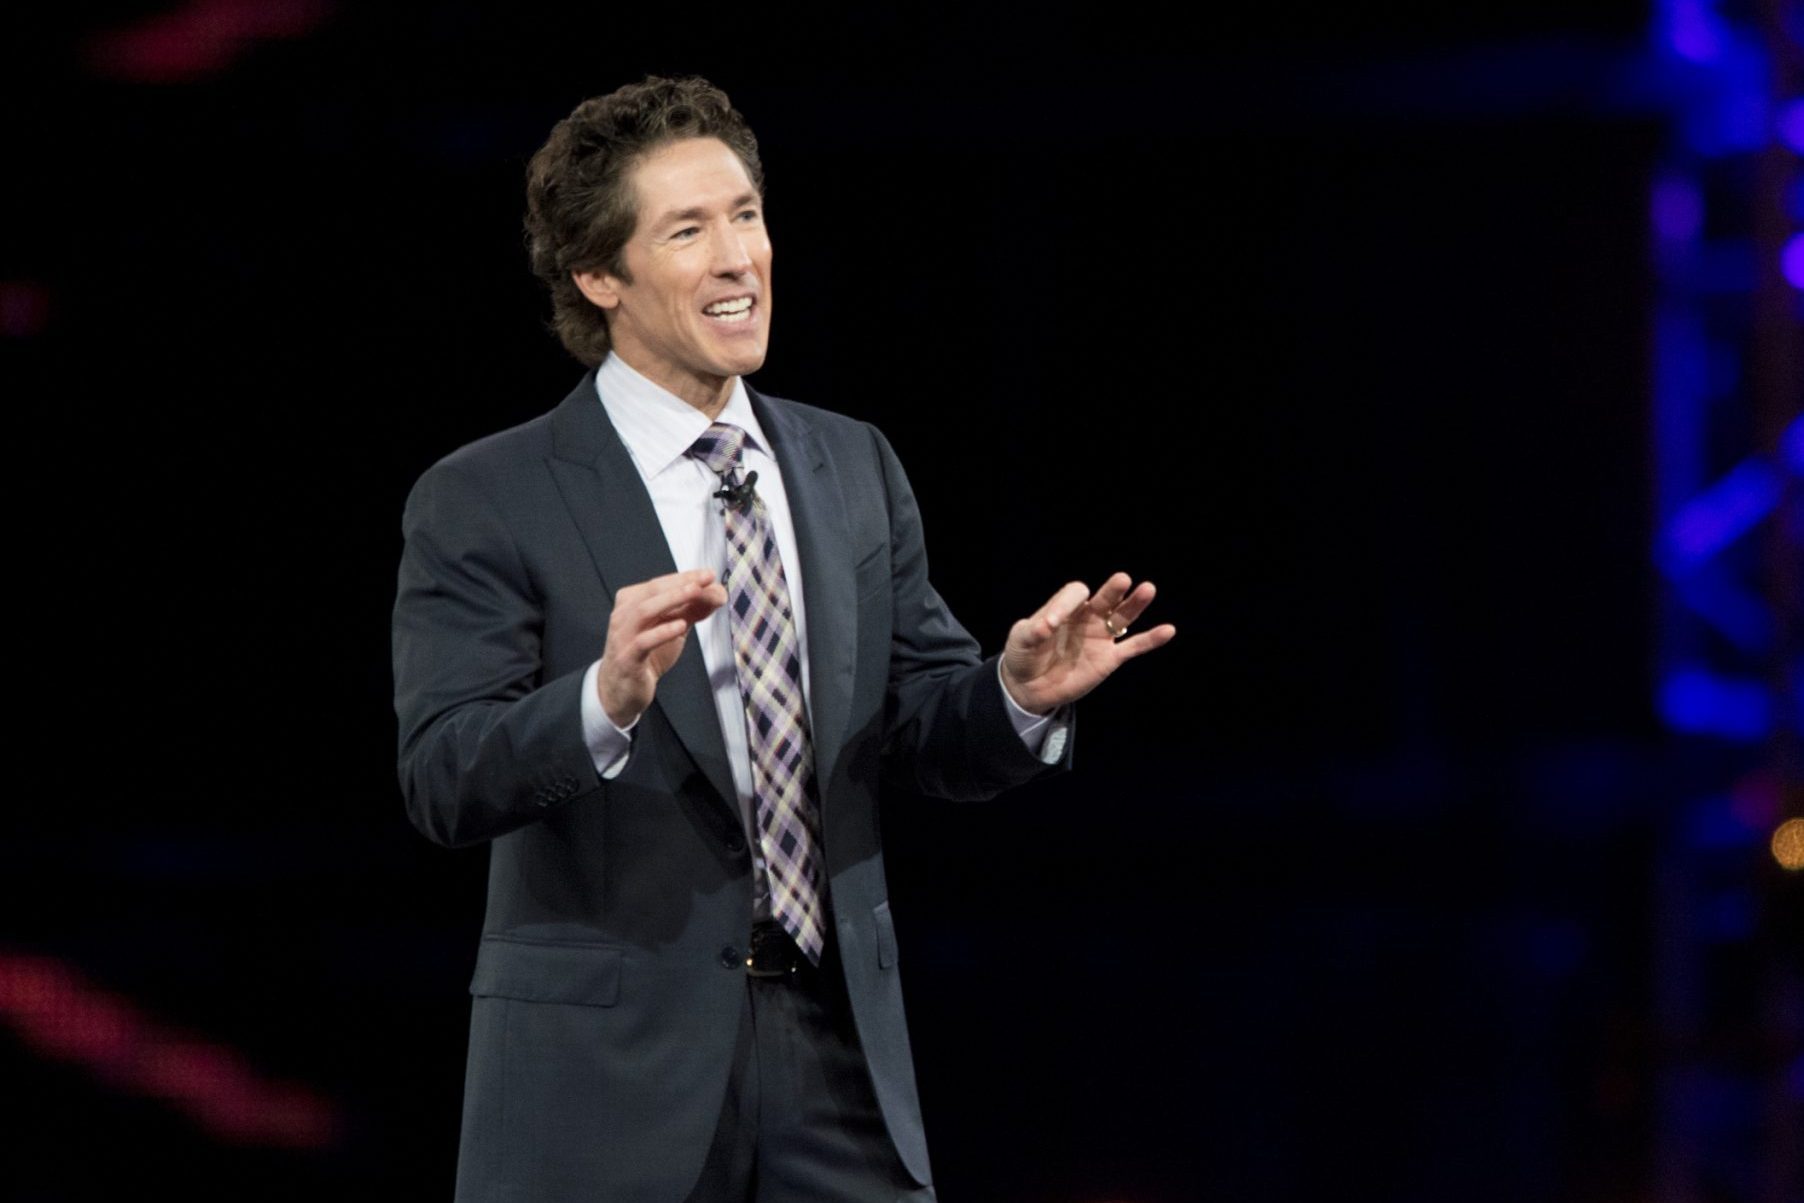 Pastor Joel Osteen speaks during MegaFest at the American Airlines Center on August 30, 2013 in Dallas, Texas